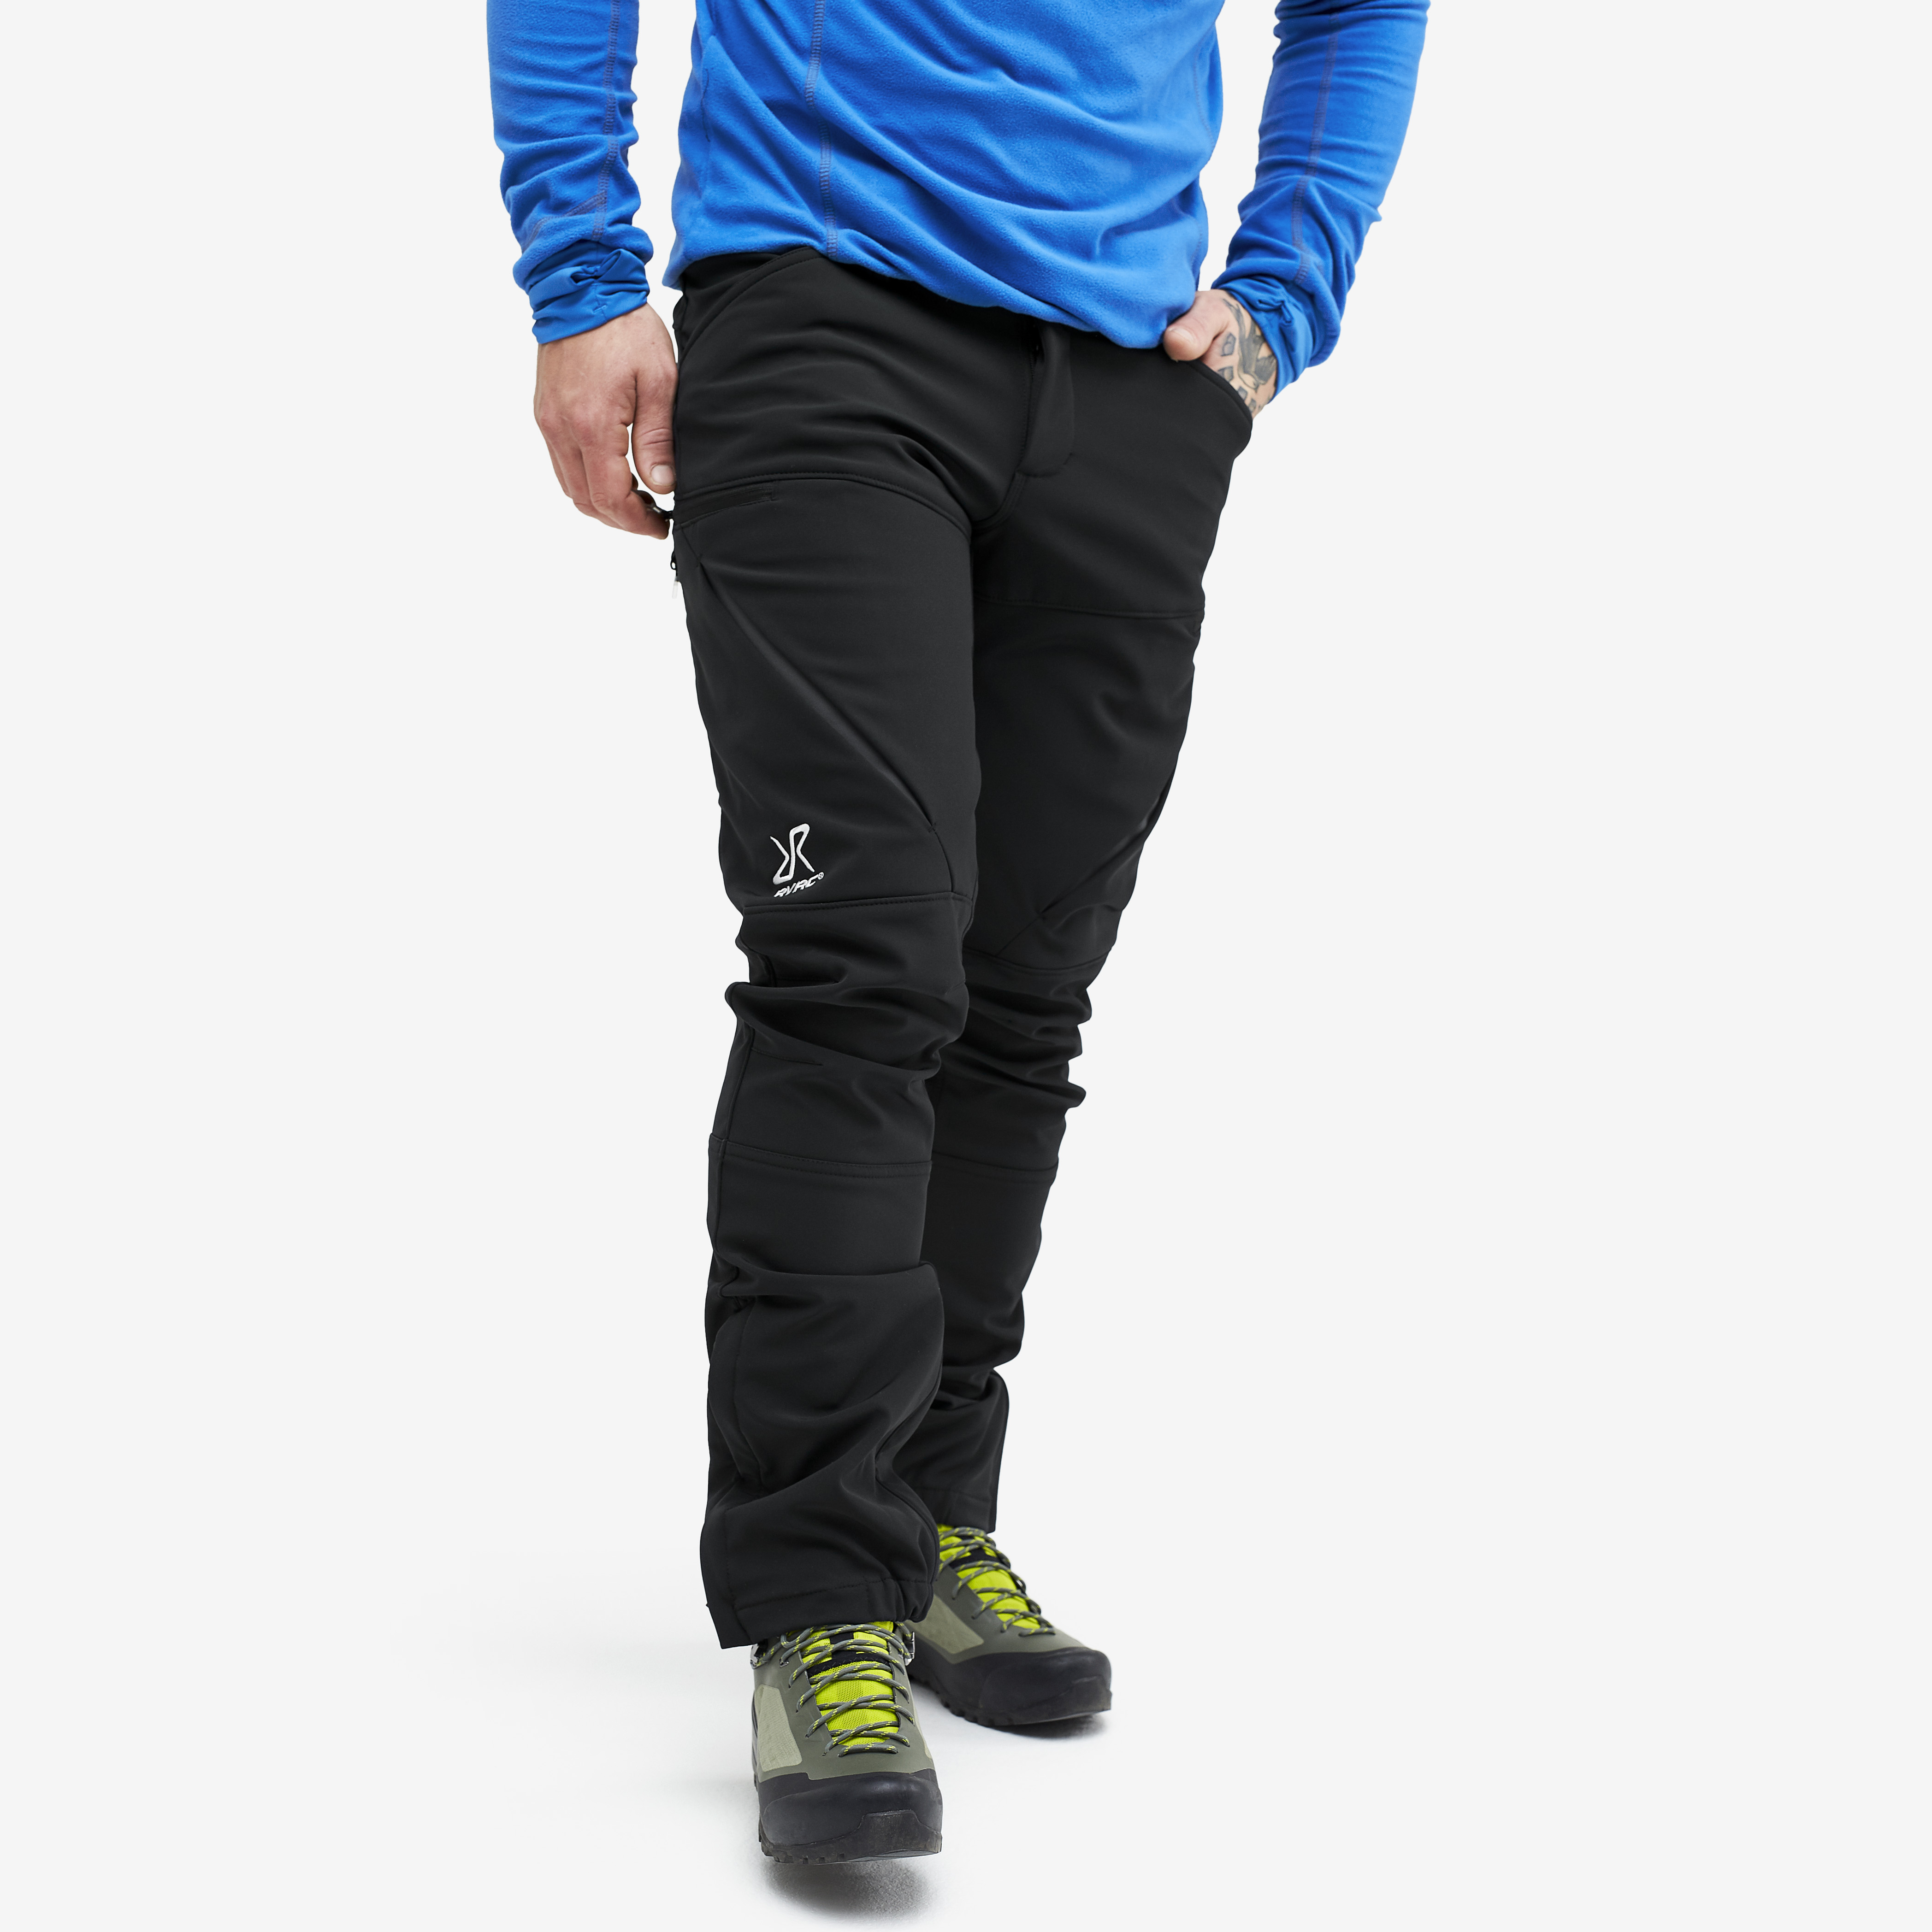 RevolutionRace Men’s Hiball Pants Durable and Ventilated Pants for All Outdoor Activities